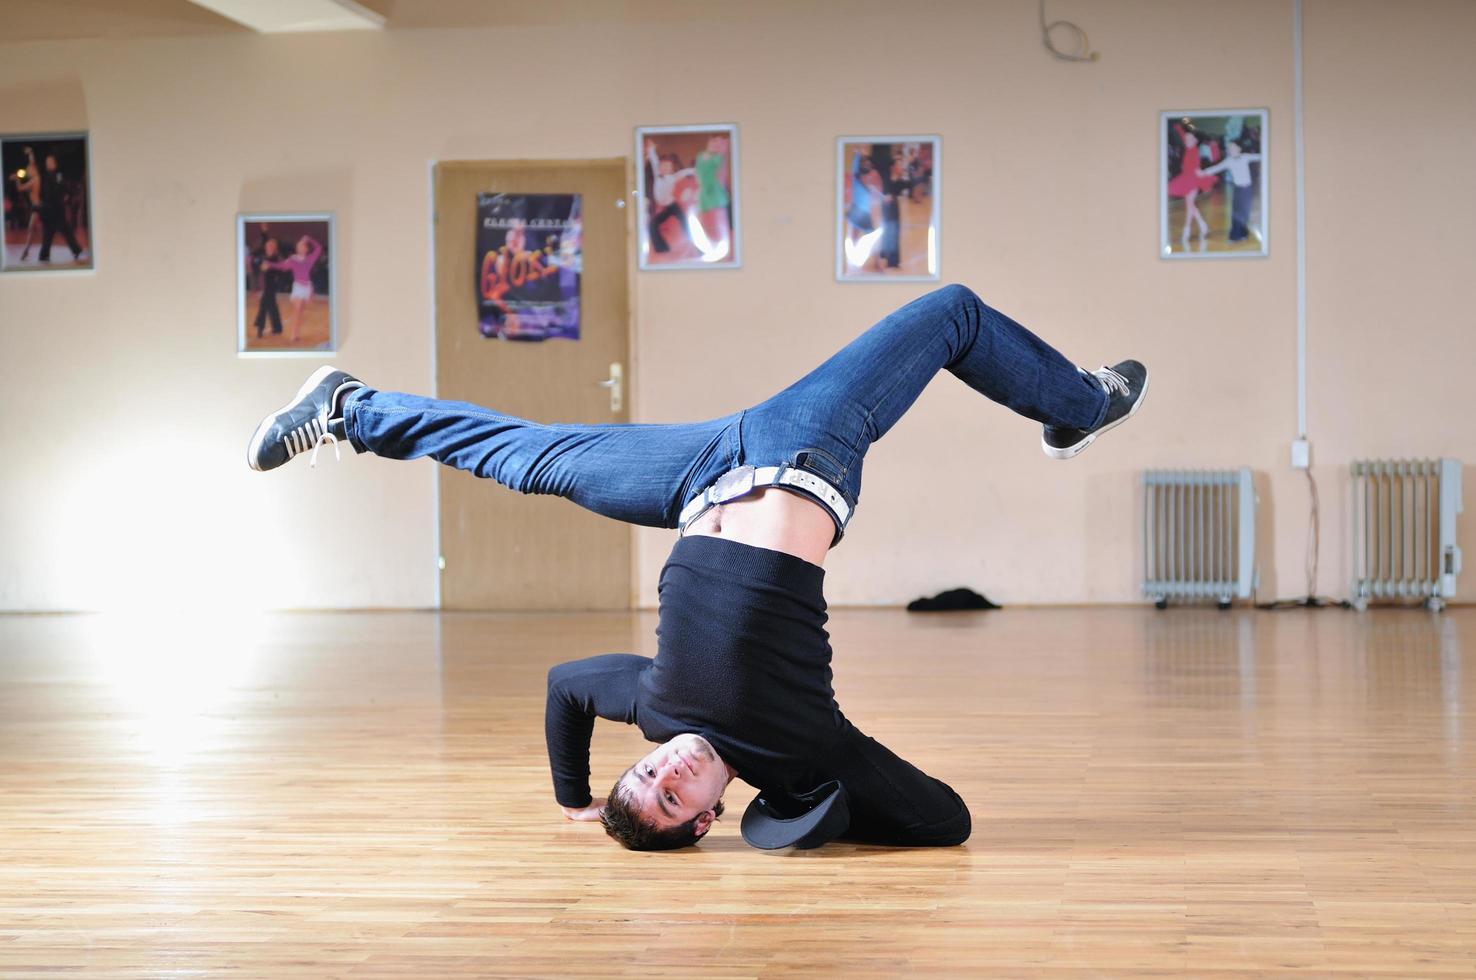 Breakdance group view photo